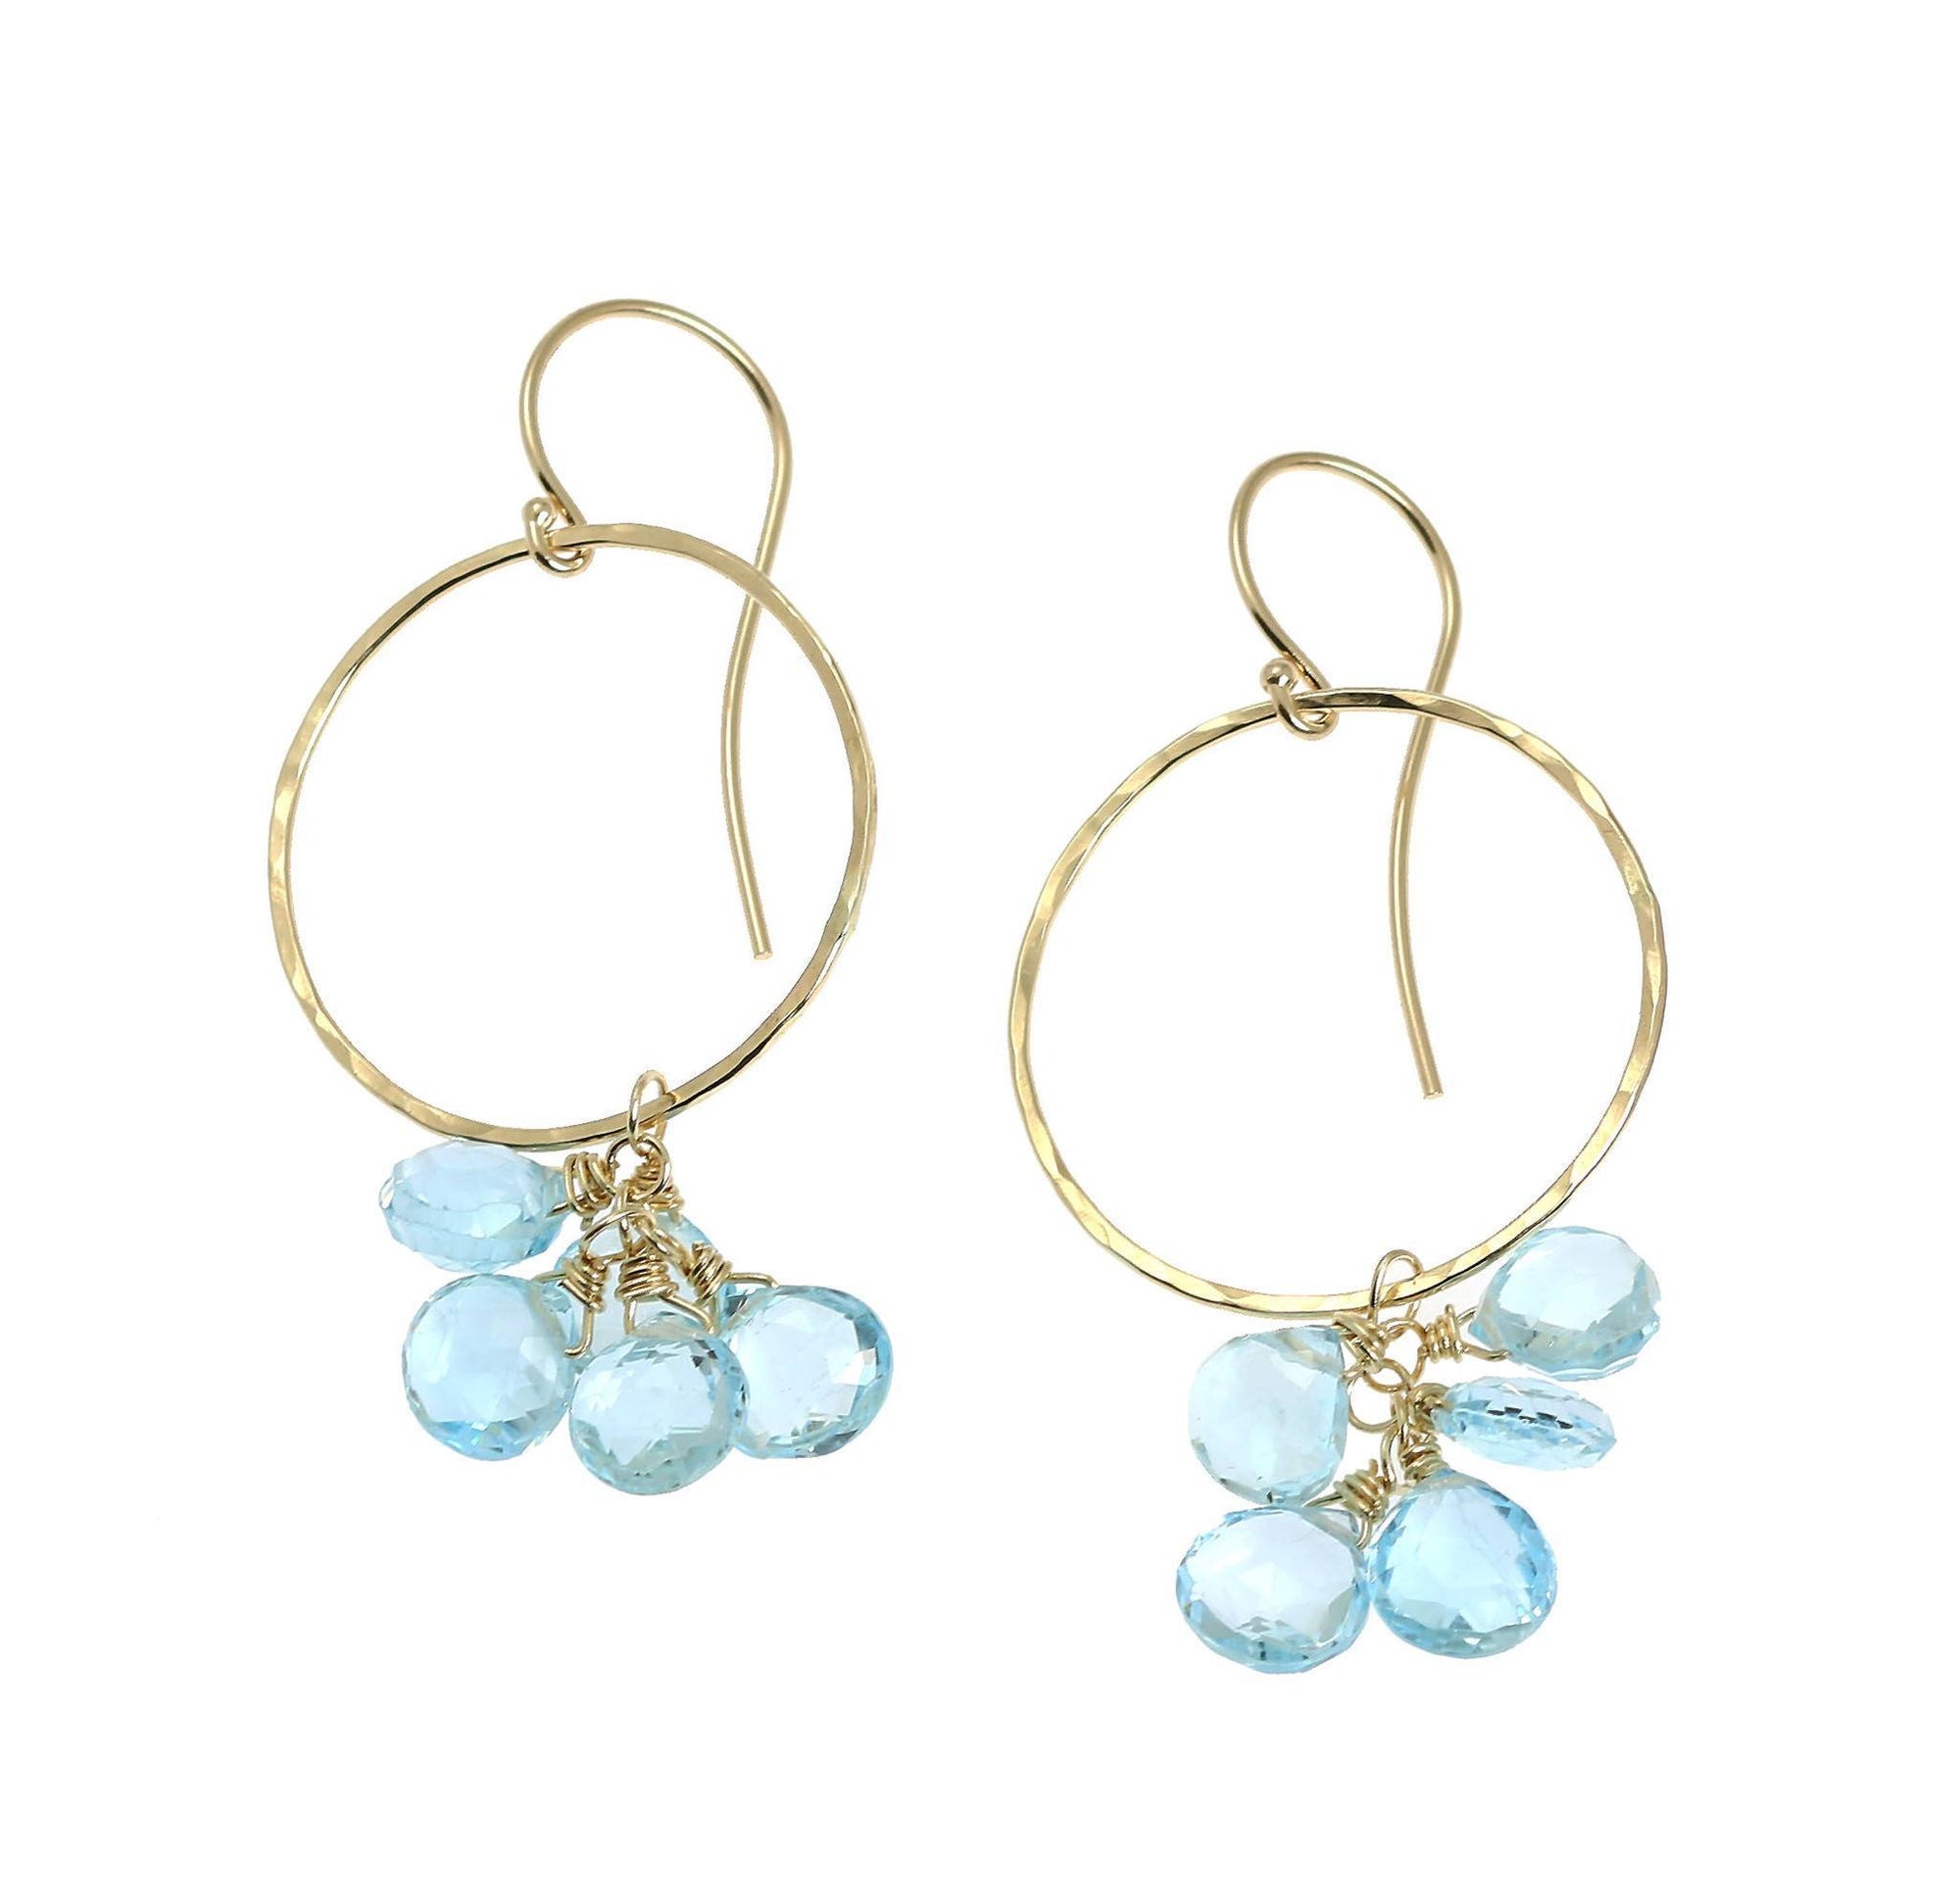 14K Hammered Gold Earrings With Blue Topaz